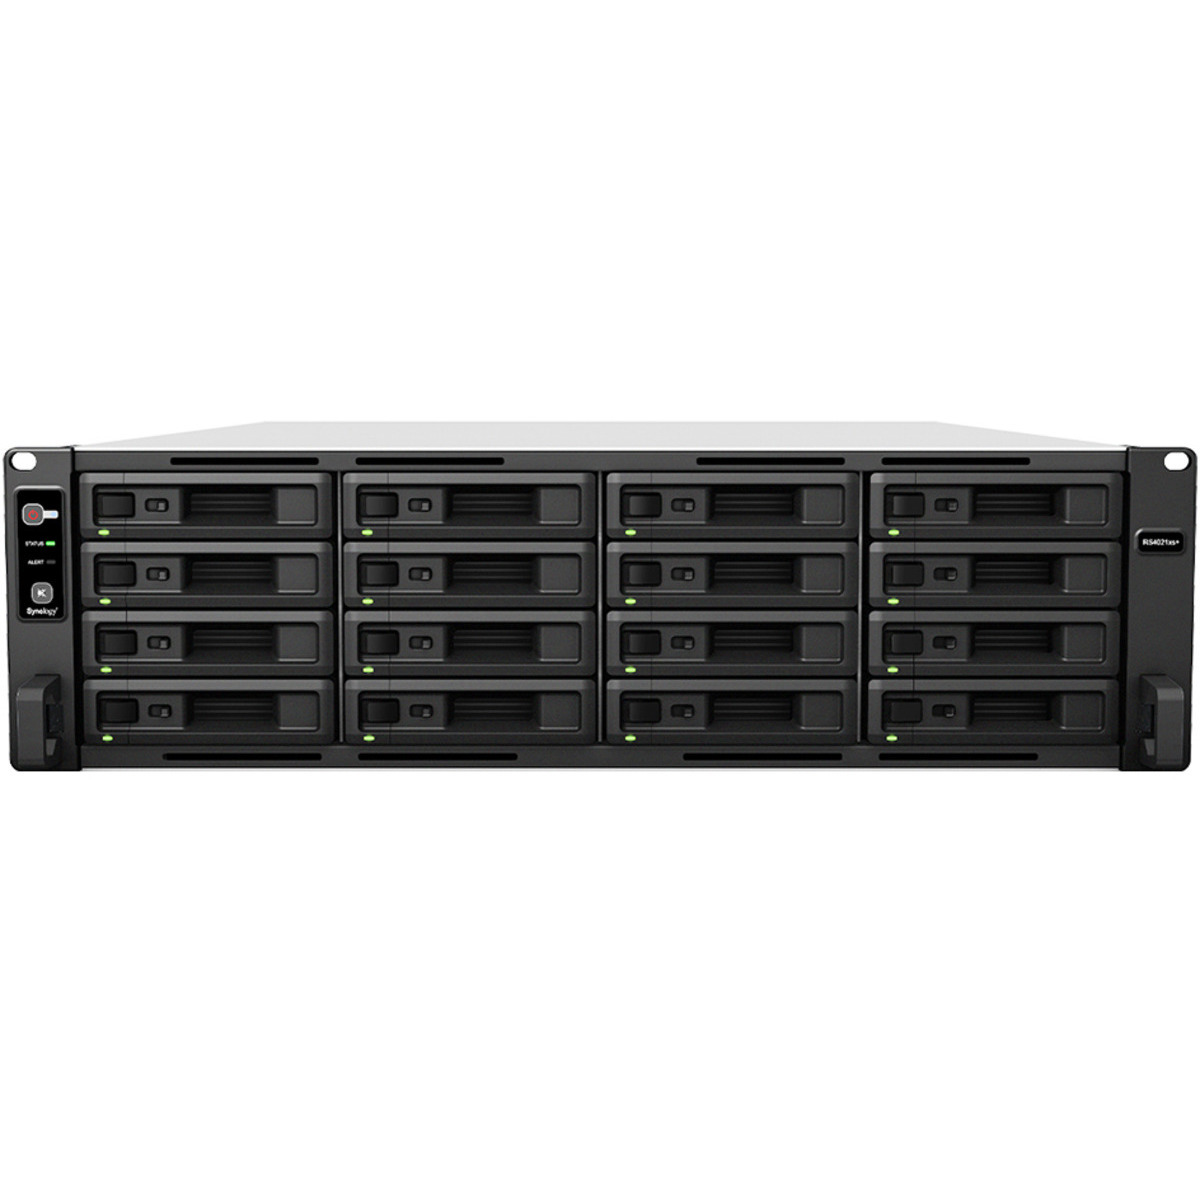 buy $8491 Synology RackStation RS4021xs+ 48tb RackMount NAS - Network Attached Storage Device 16x3000gb Seagate BarraCuda ST3000DM007 3.5 7200rpm SATA 6Gb/s HDD CONSUMER Class Drives Installed - Burn-In Tested - nas headquarters buy network attached storage server device das new raid-5 free shipping usa christmas new year holiday sale RackStation RS4021xs+